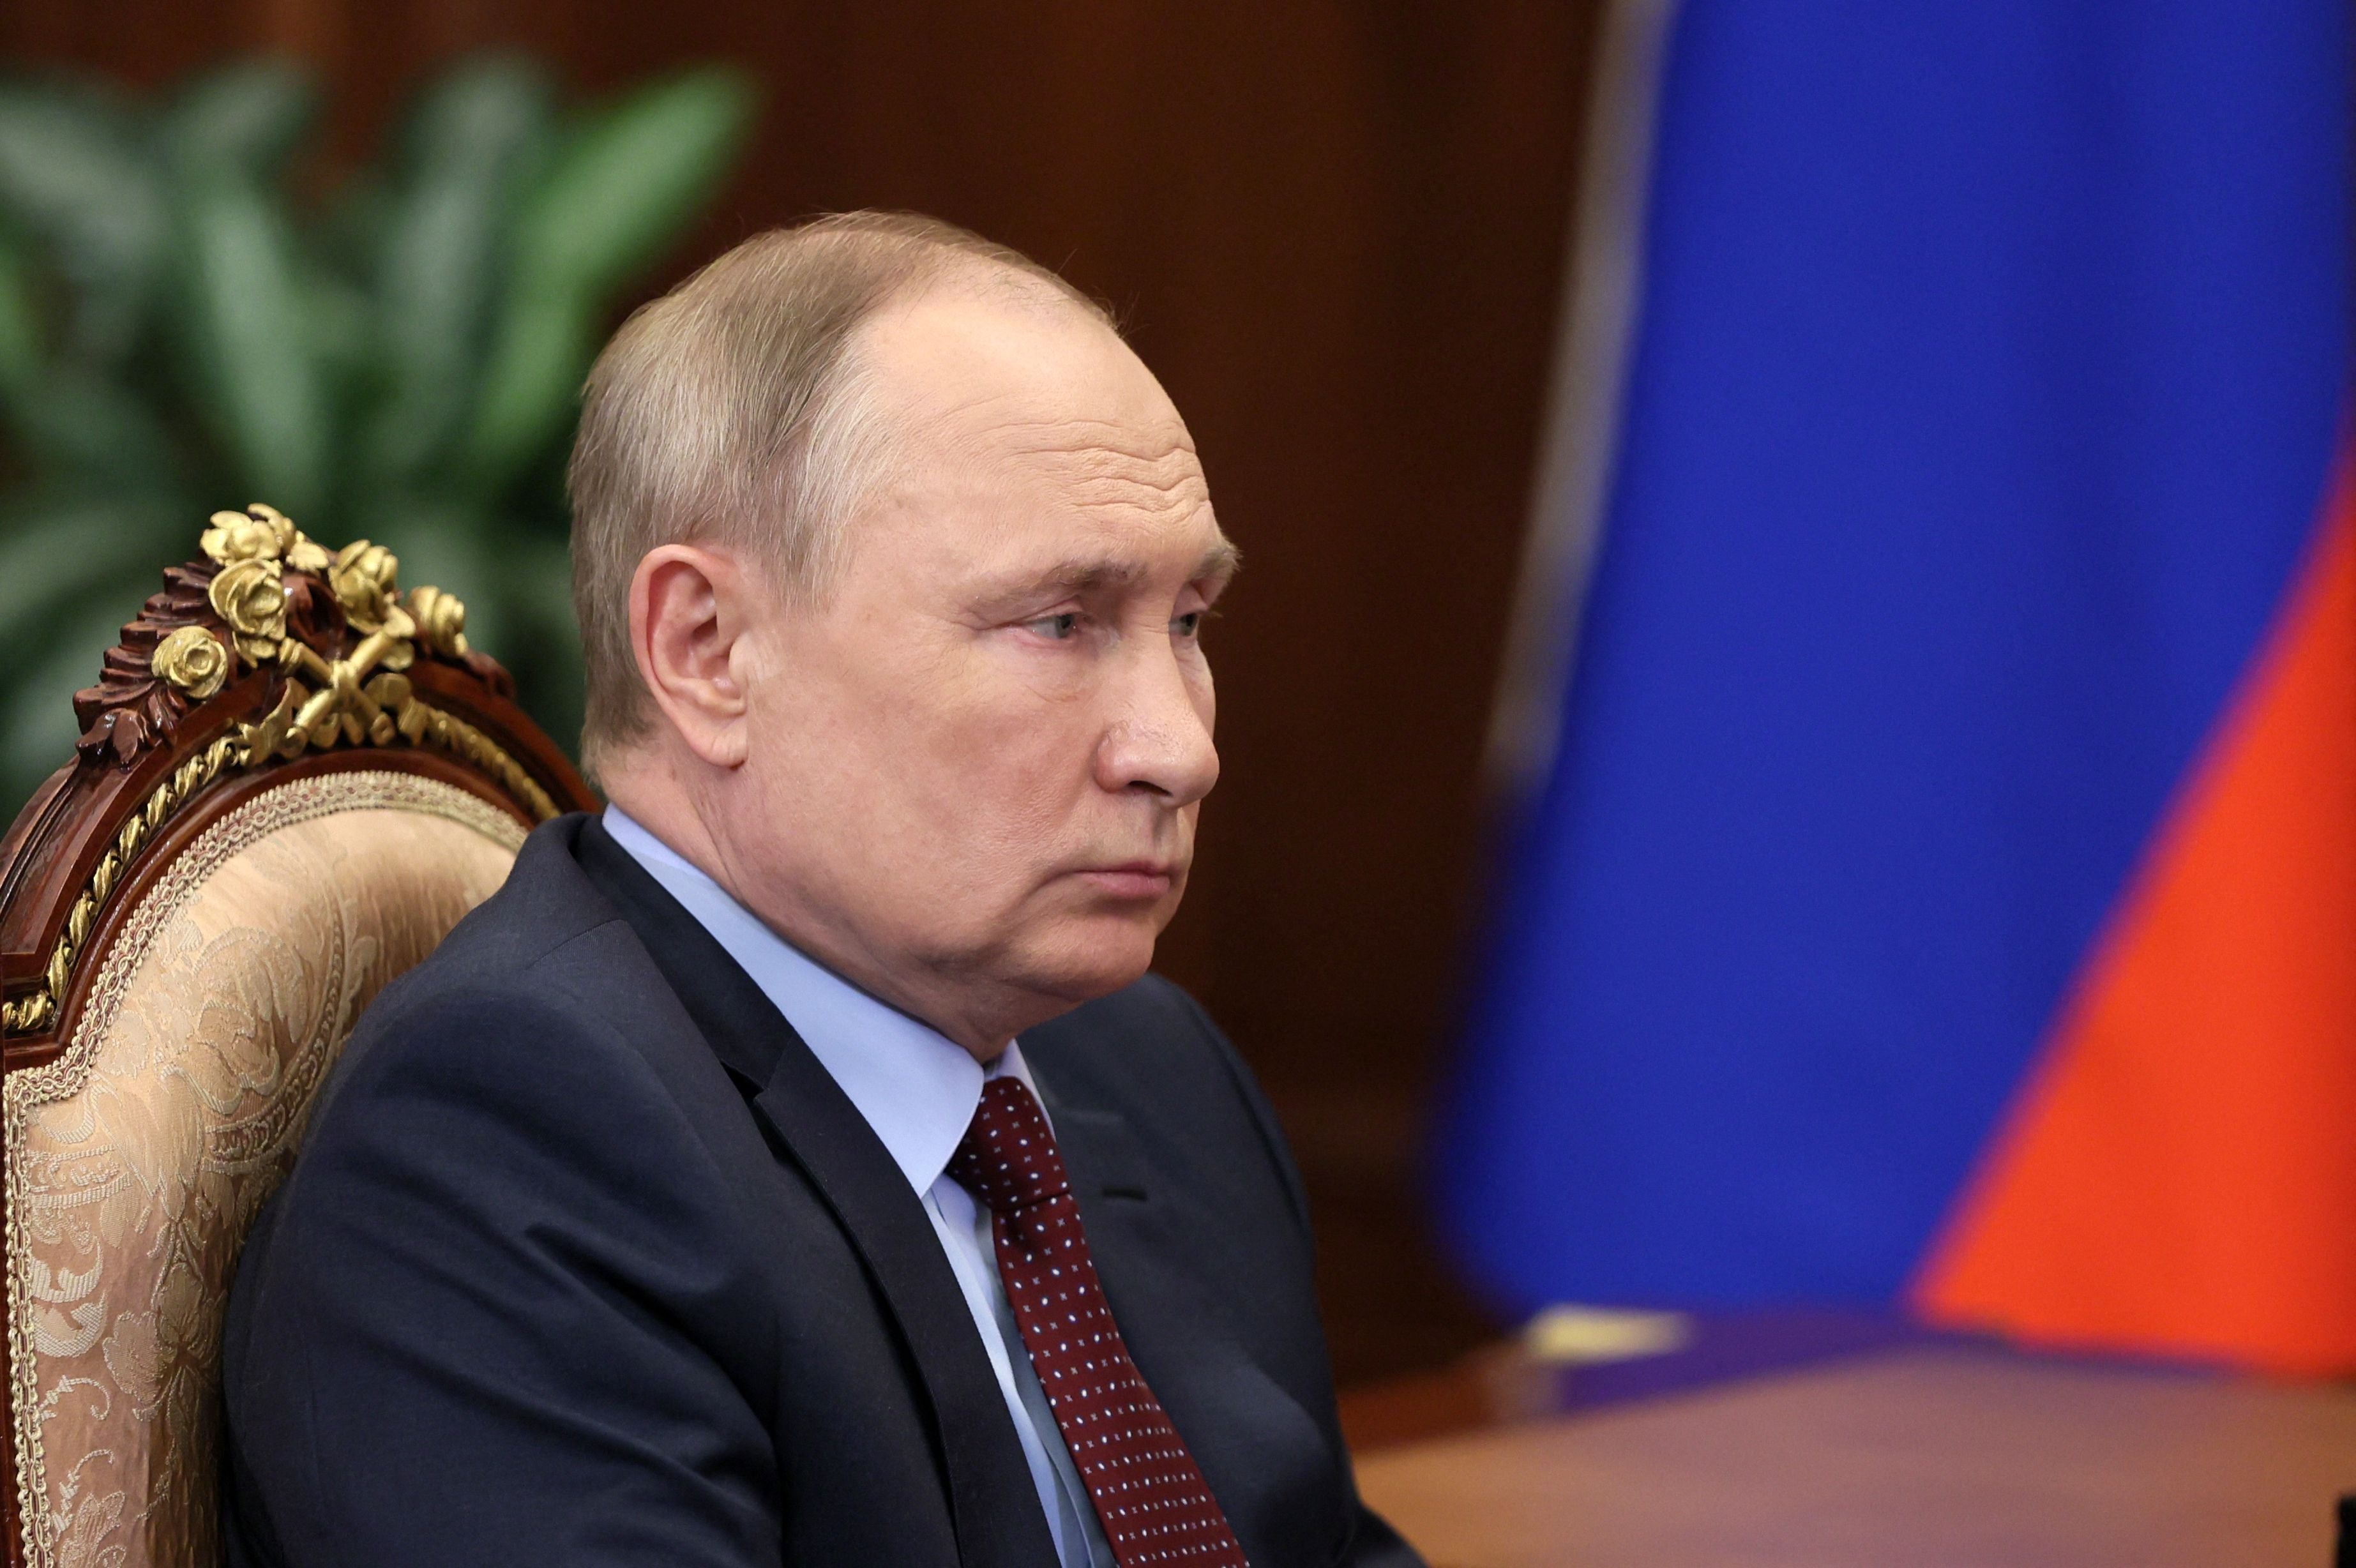 Putin has never appeared more arrogant or scornful of the deadly impact of his actions.